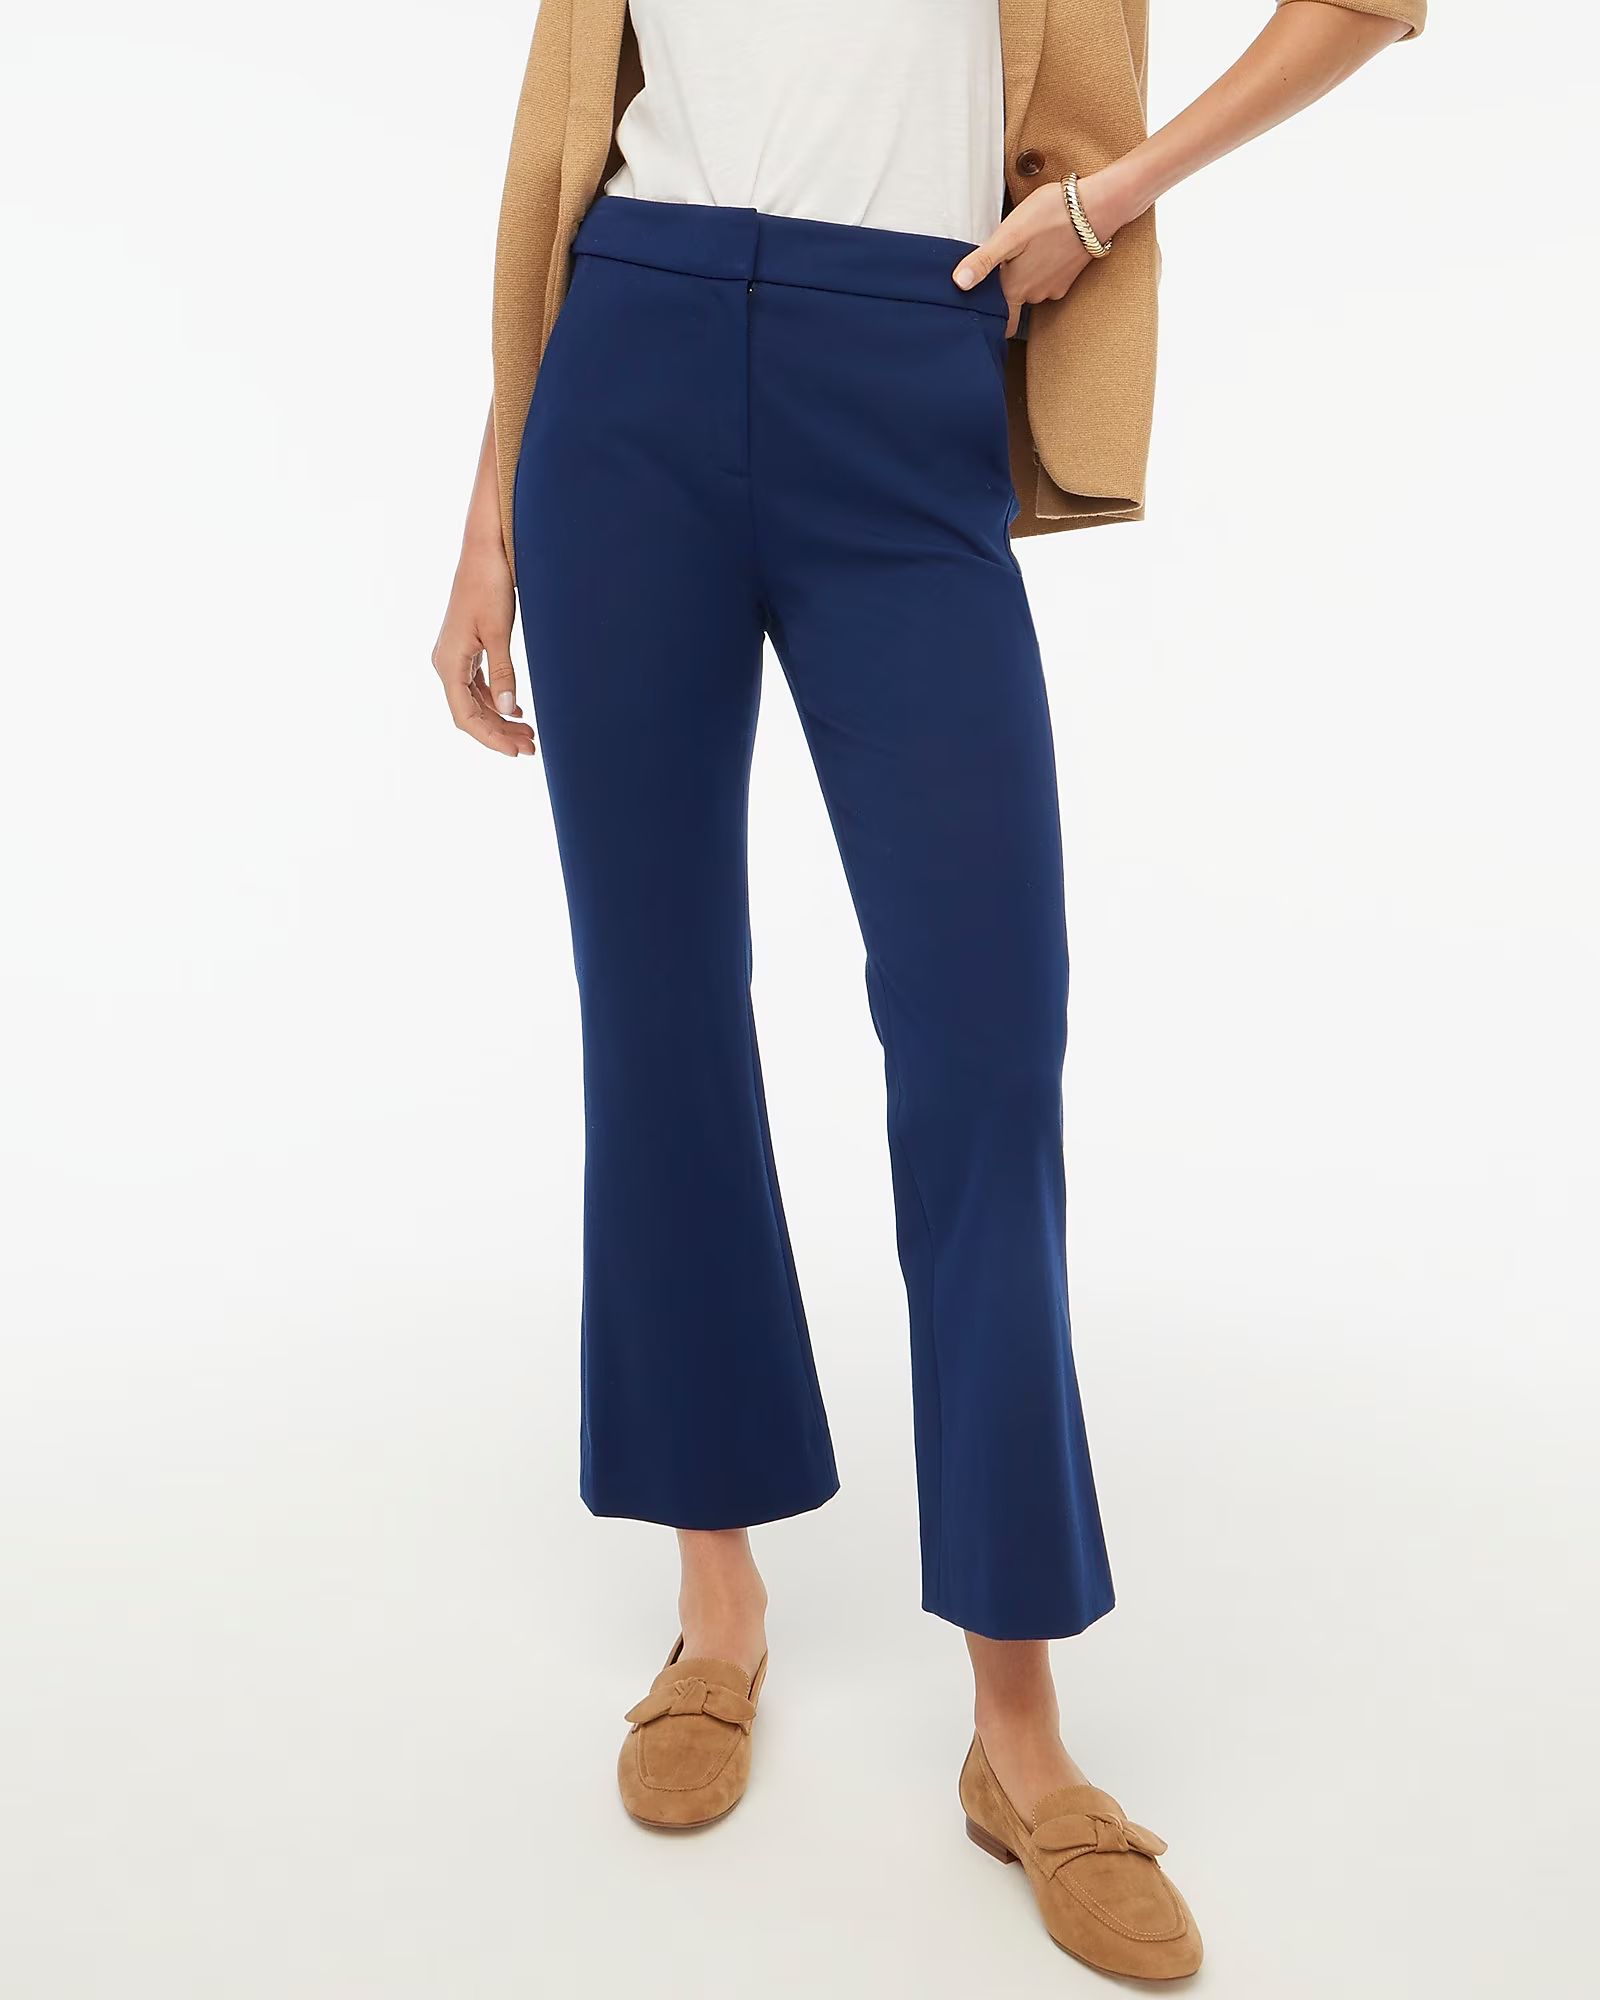 Kelsey flare pant | J.Crew Factory